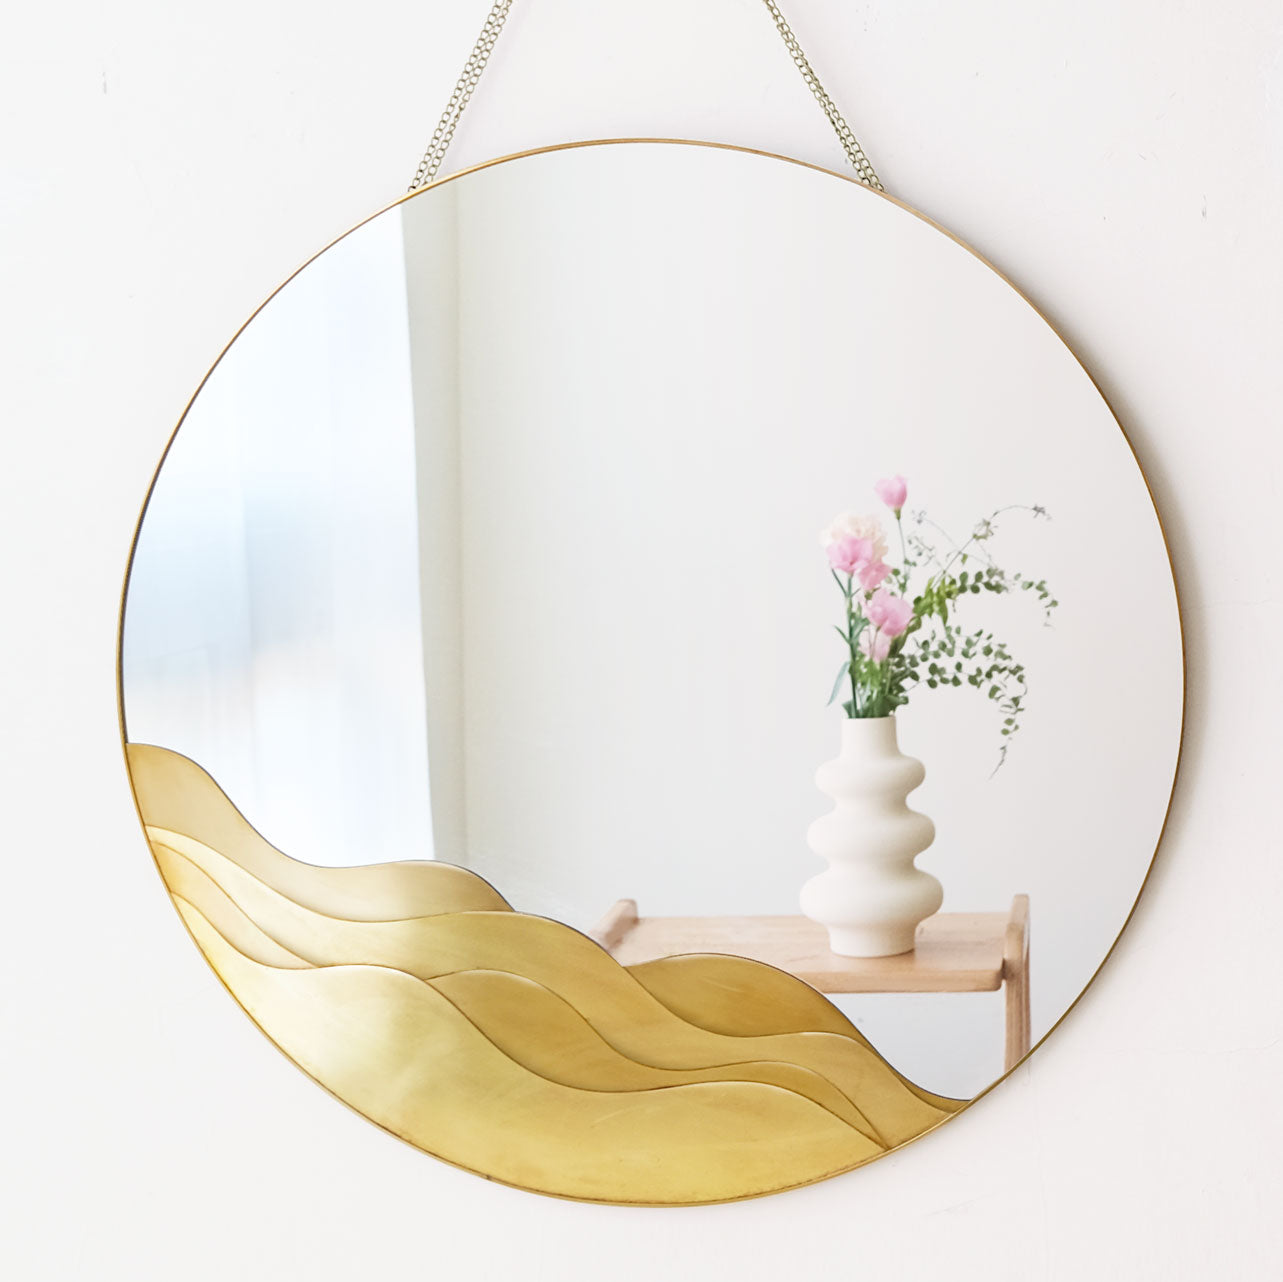  Brass wall decor-Big vanity mirror-Wave Design-The most beautiful Home furnishing and home accents at FONDAZZA.